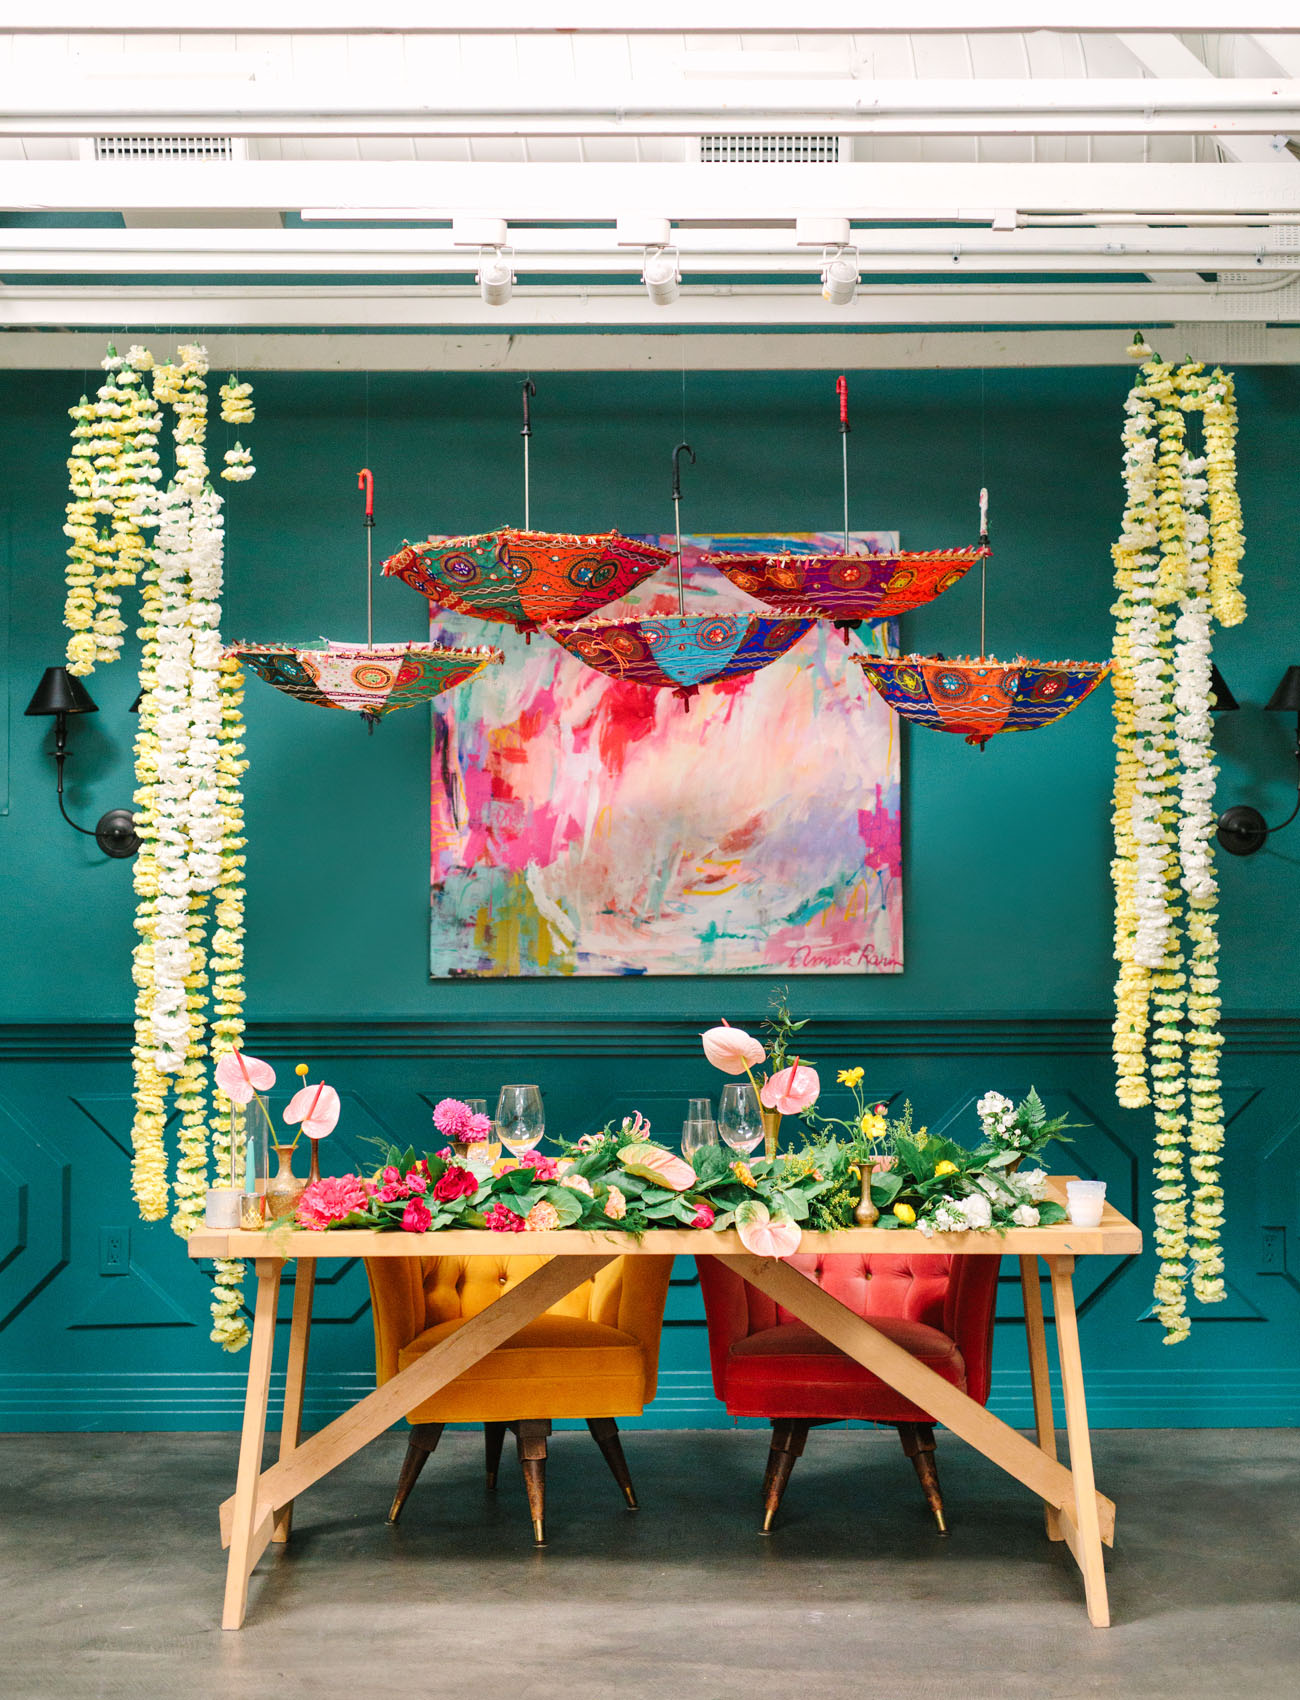 The sweetheart table featured greenery and bold blooms, colorful umbrellas and an artwork